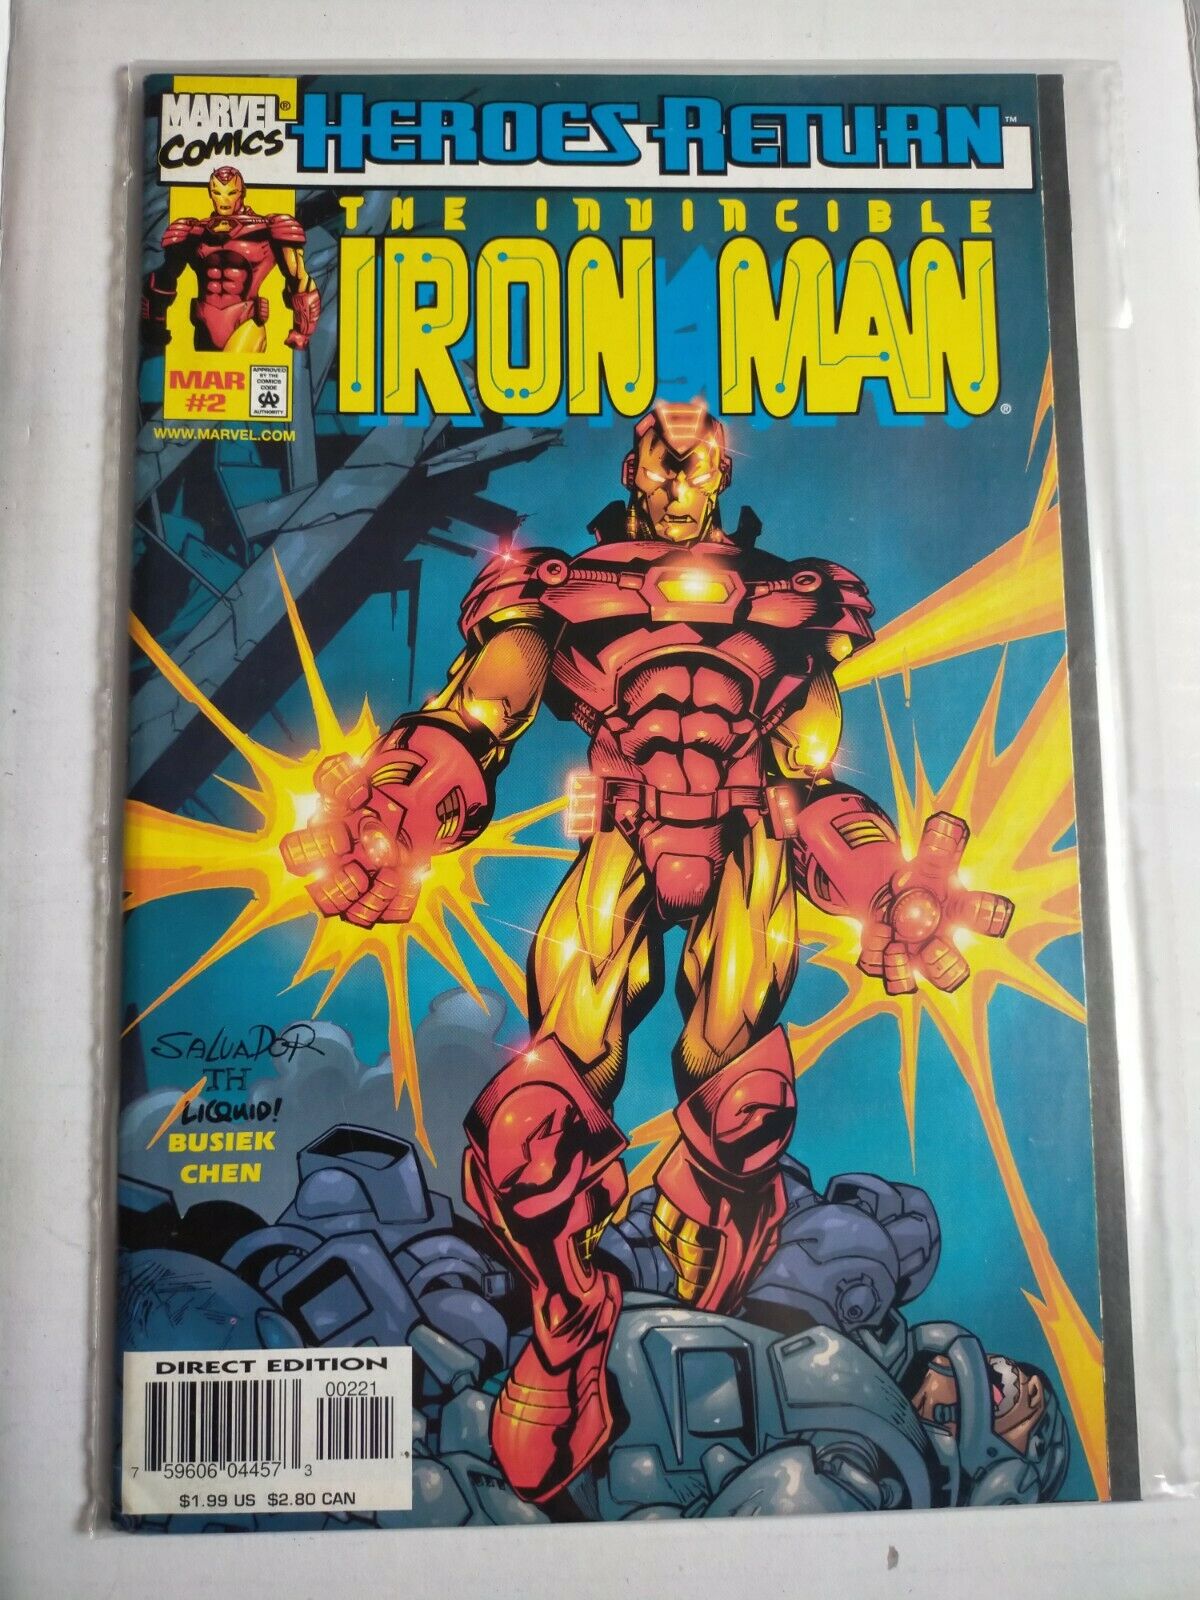 Marvel Comic Book Heroes Return The Invincible Iron Man No.2 March –  Shields Stamps  Coins